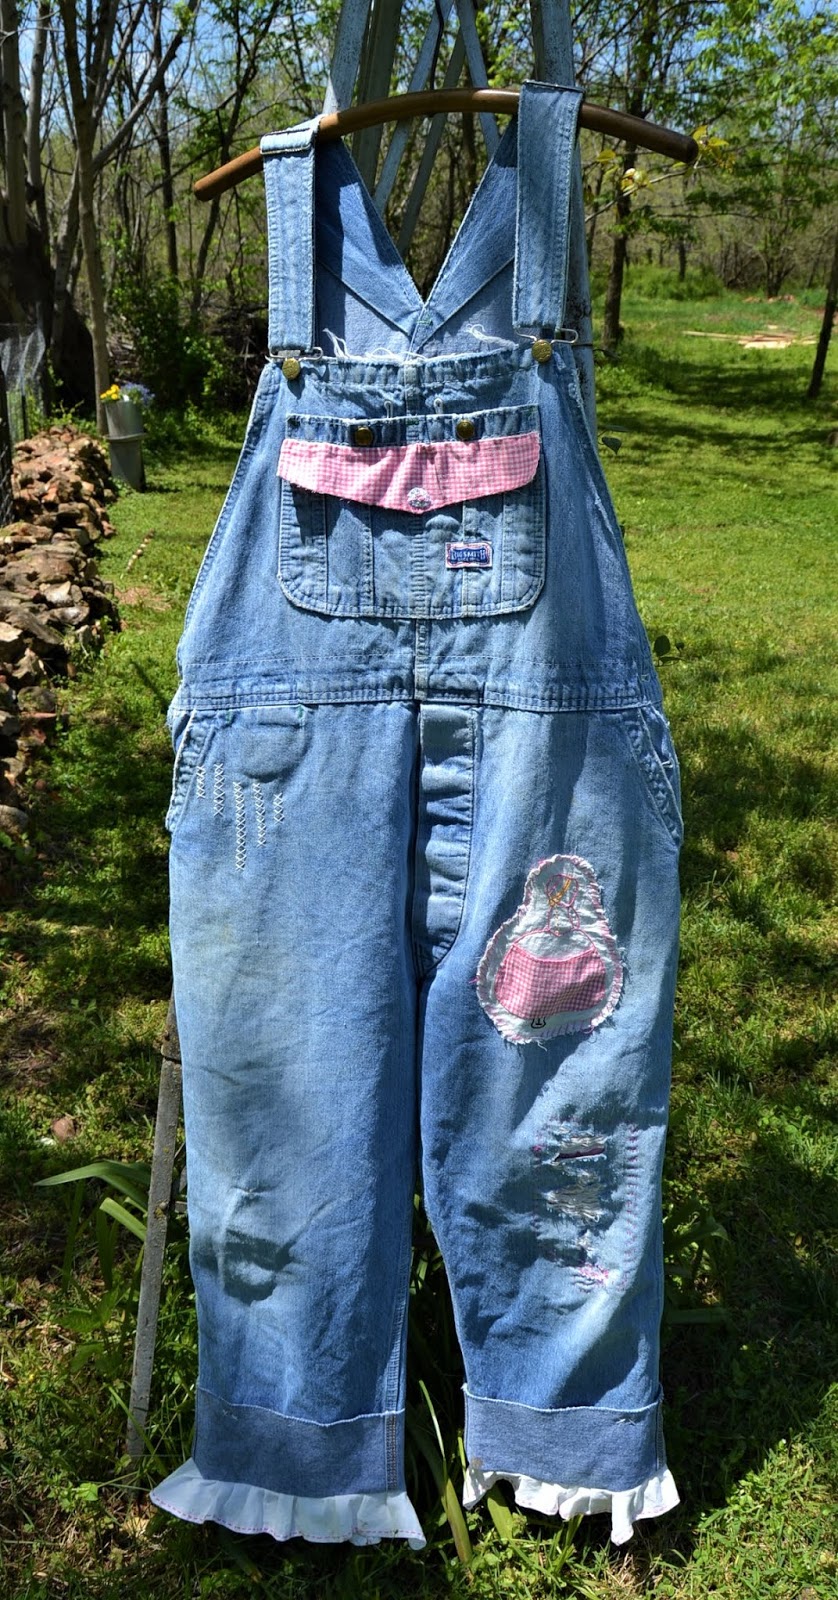 Saturdays Vintage Finds: Another Pair Of Upcycled Overalls